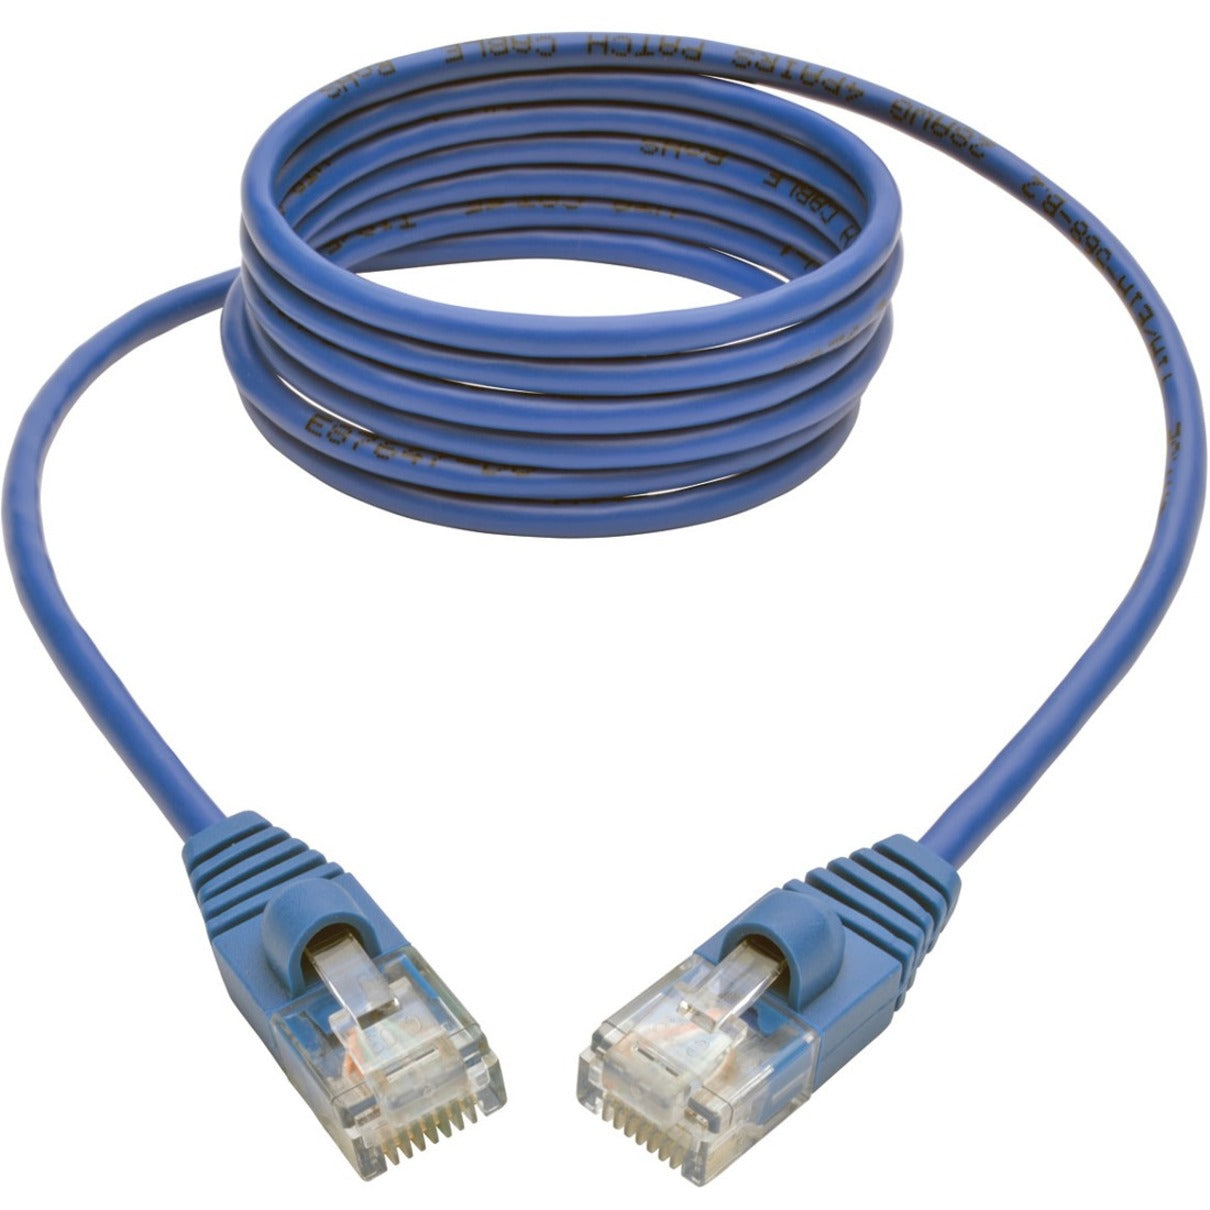 Tripp Lite N001-S05-BL Cat5e 350 MHz Snagless Molded Slim UTP Patch Cable (RJ45 M/M), Blue, 5ft, High-Speed Network Cable